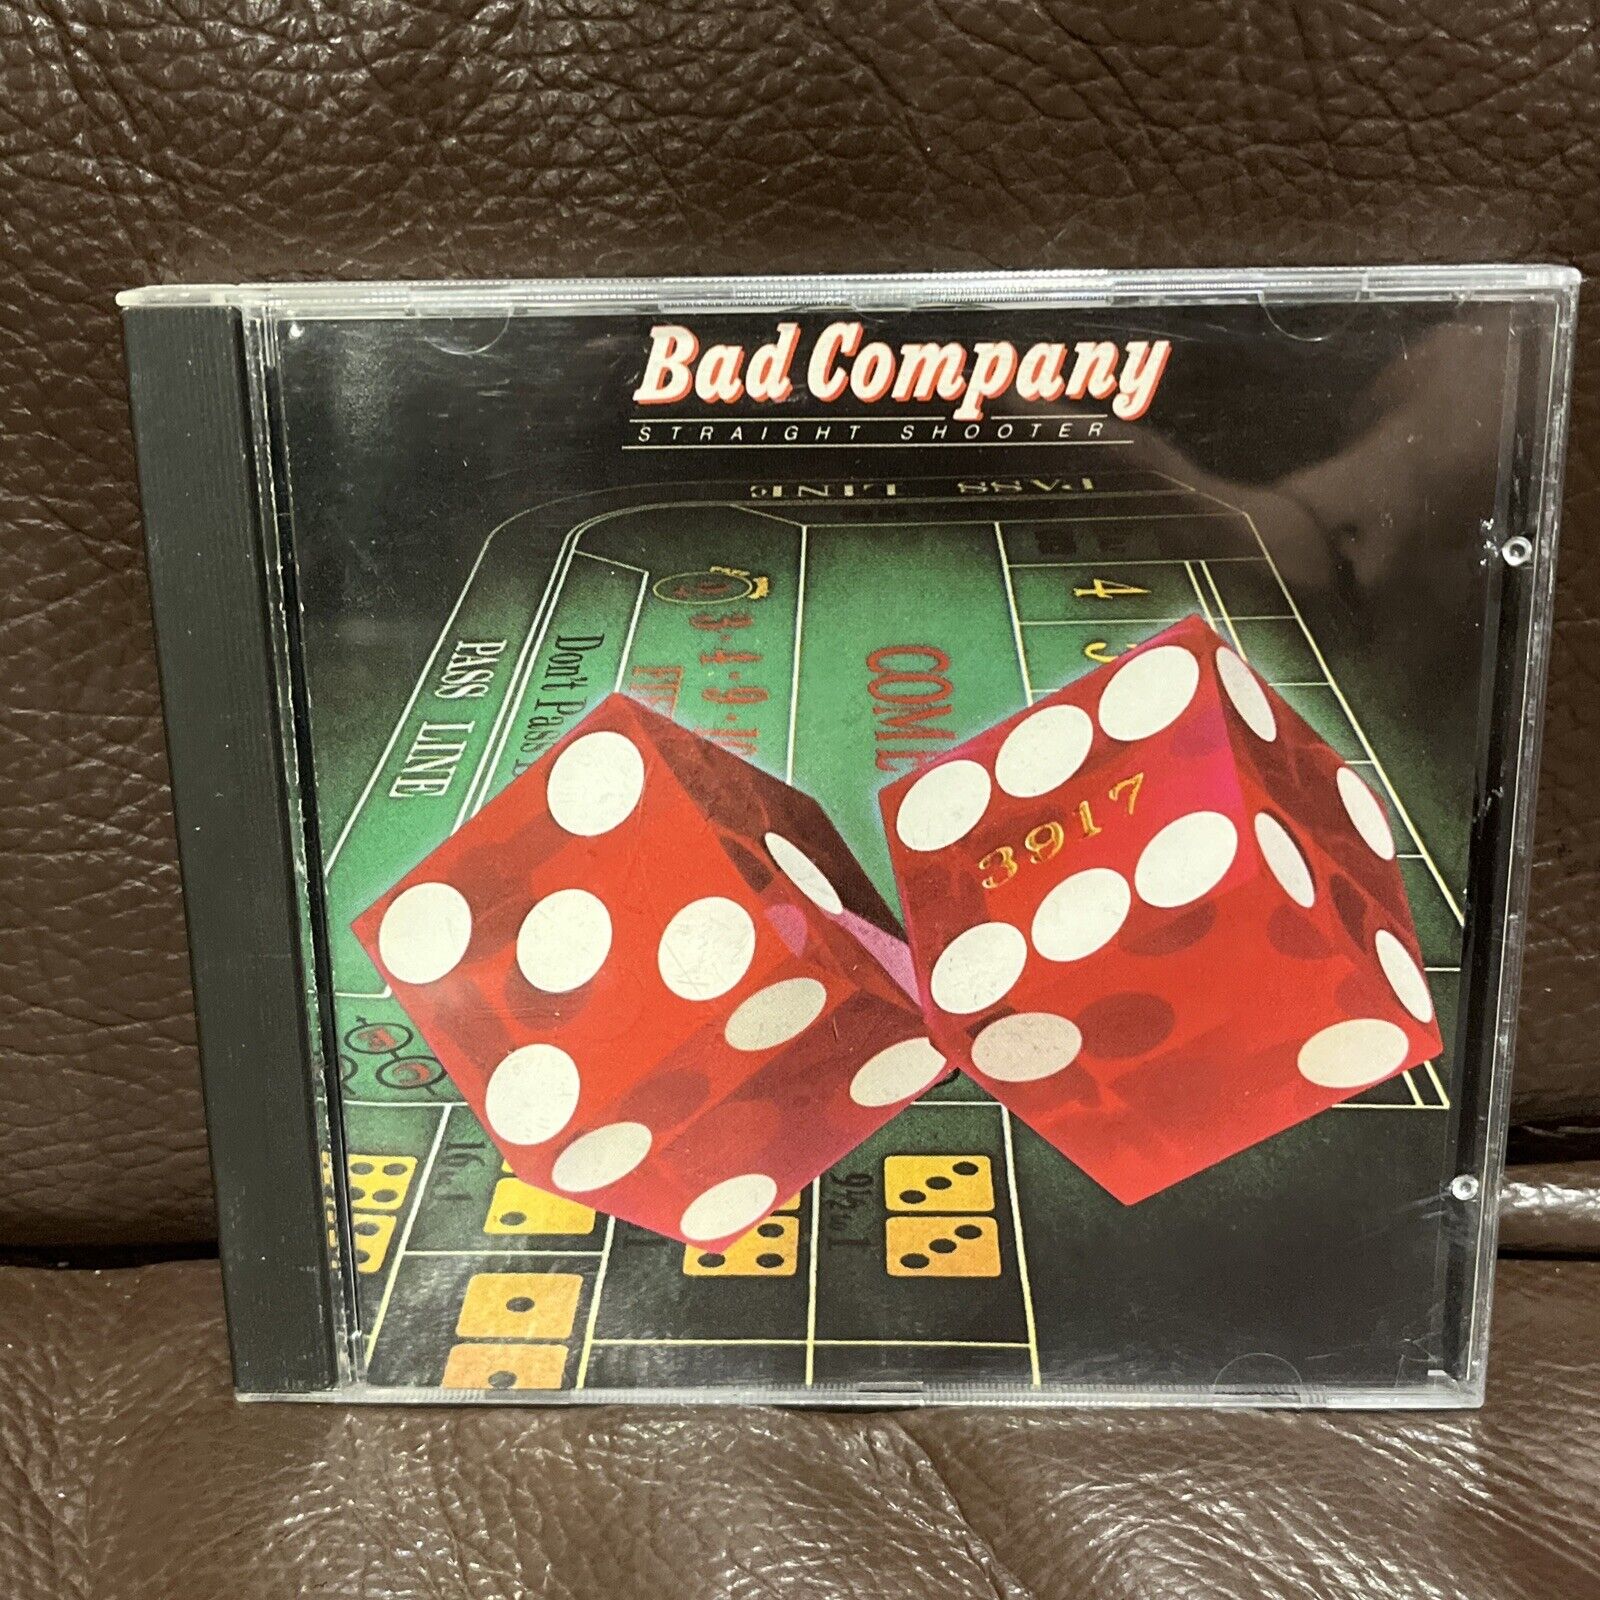 BAD COMPANY - Straight Shooter - CD 1988 Reissue TESTED MINT DISC